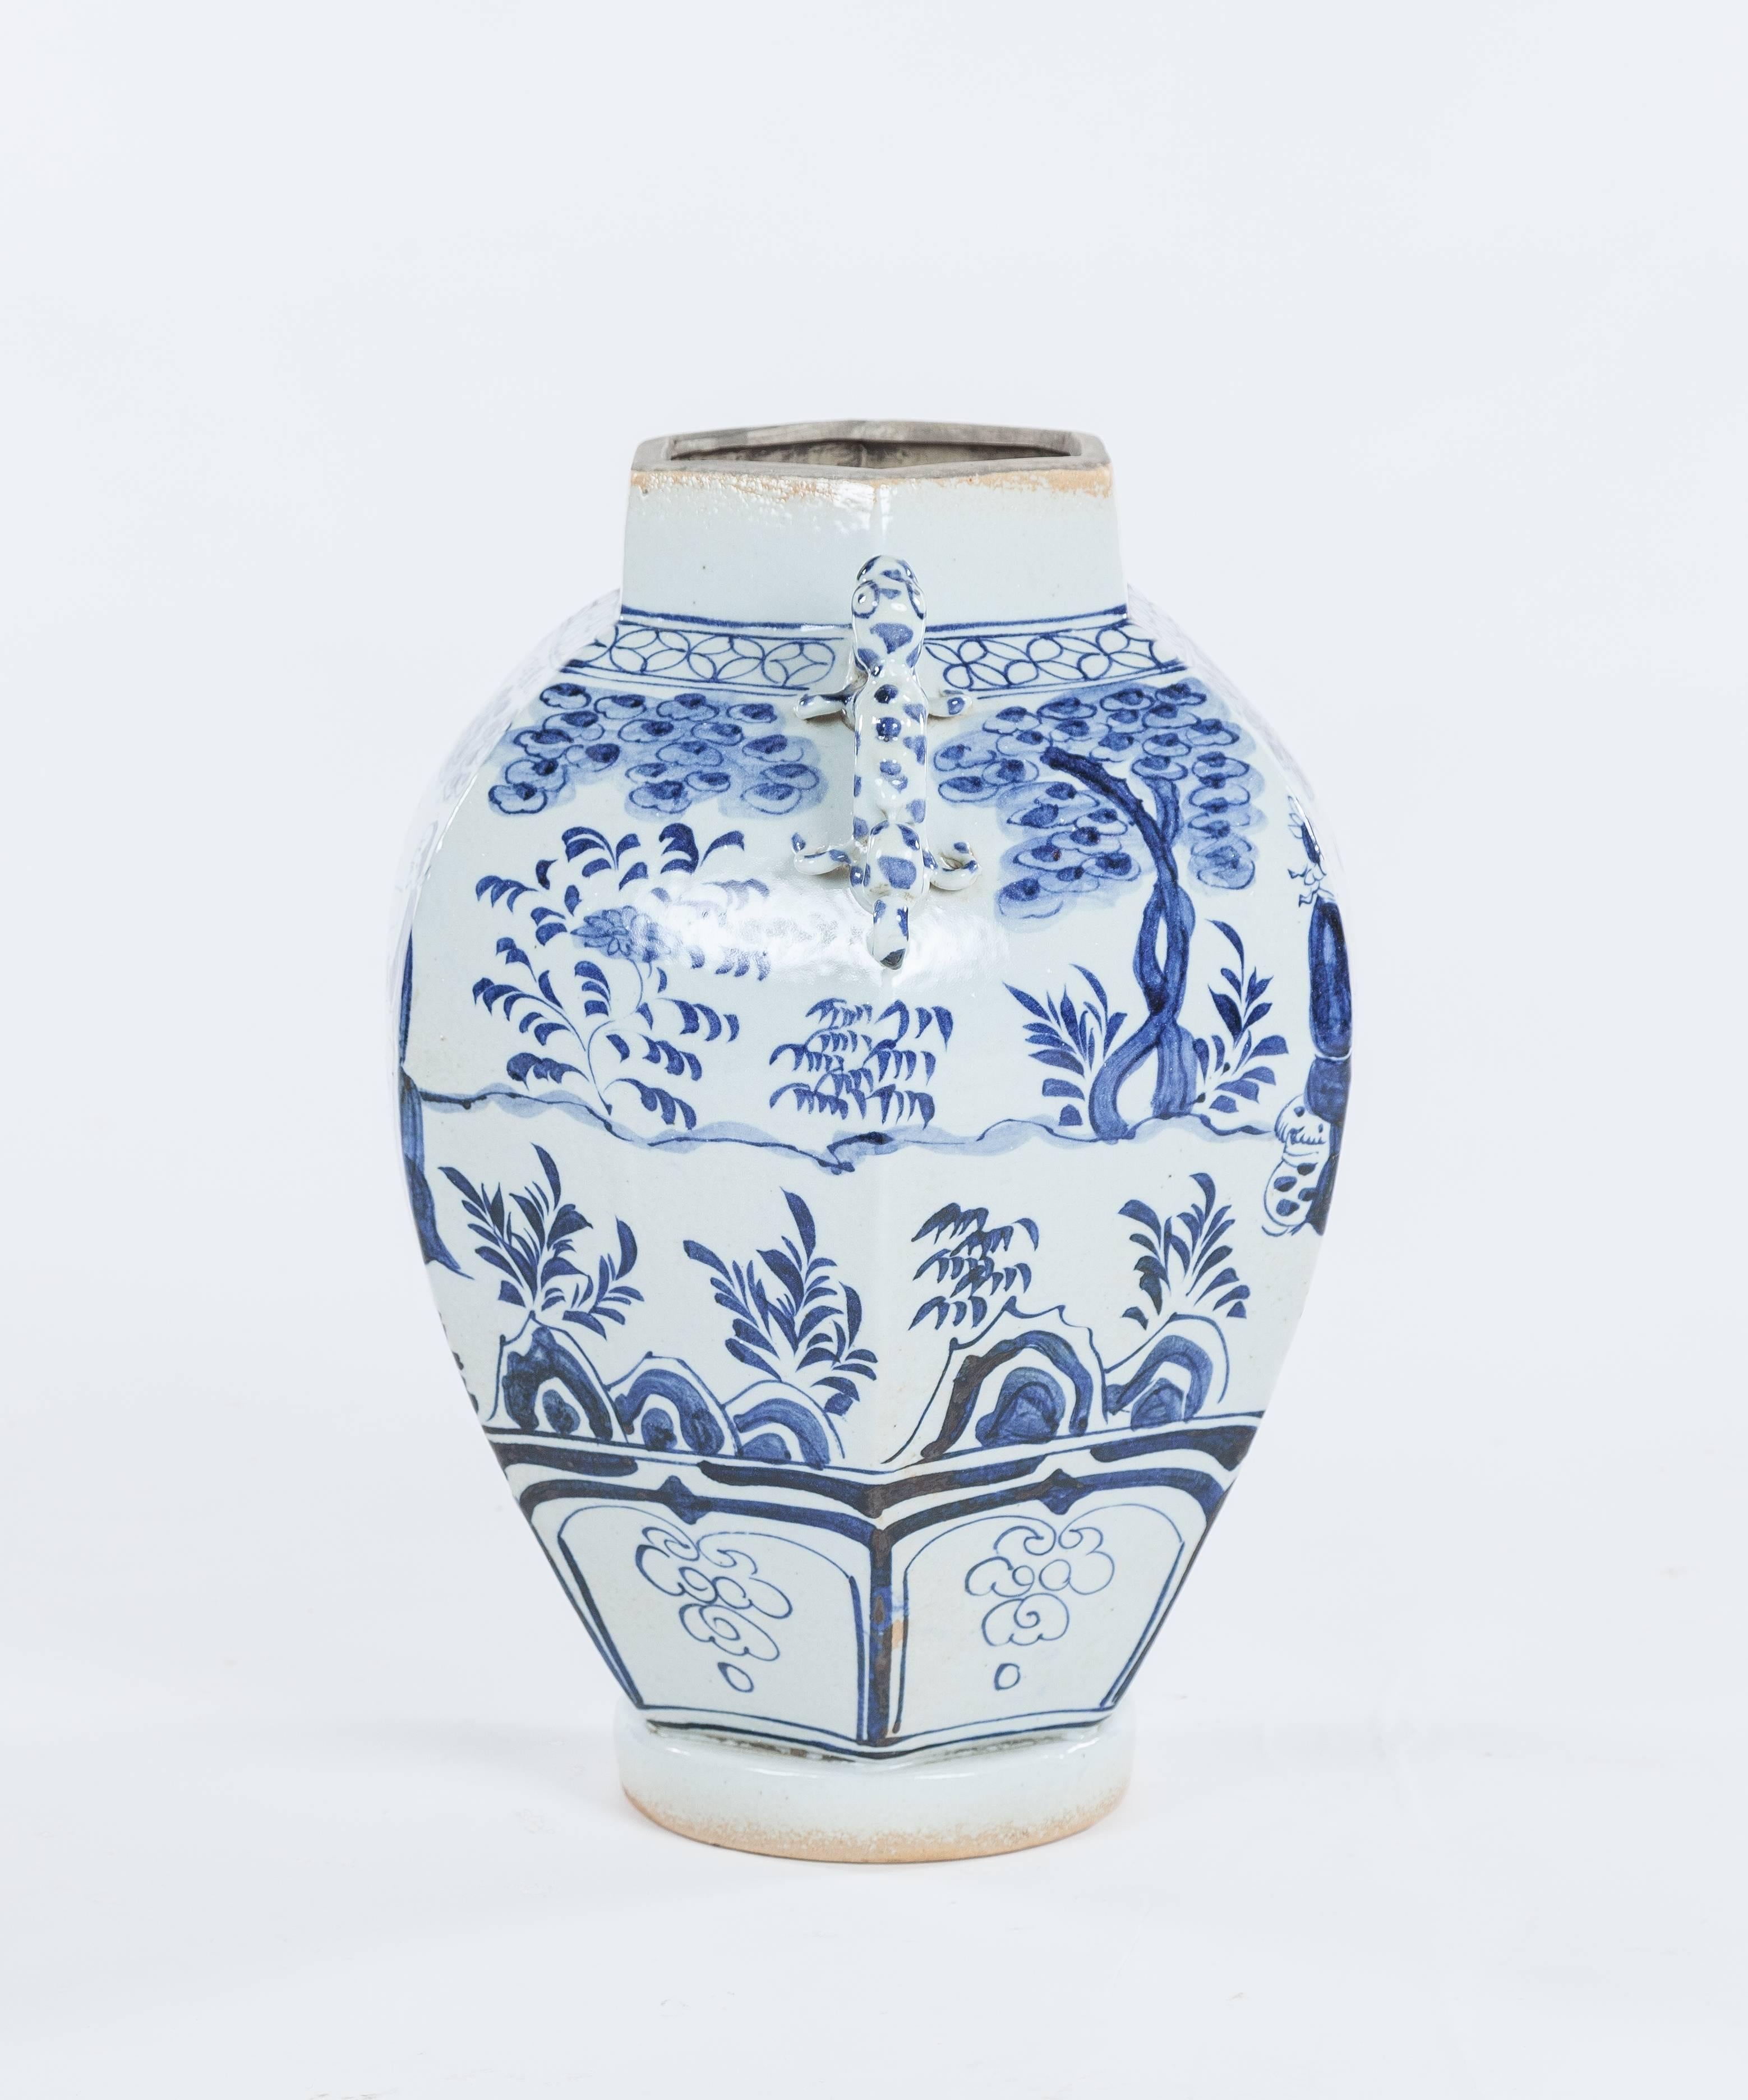 An antique Ming-style Chinese blue and white porcelain vase dating to the late 19th century. The vase measures approximately 14.5